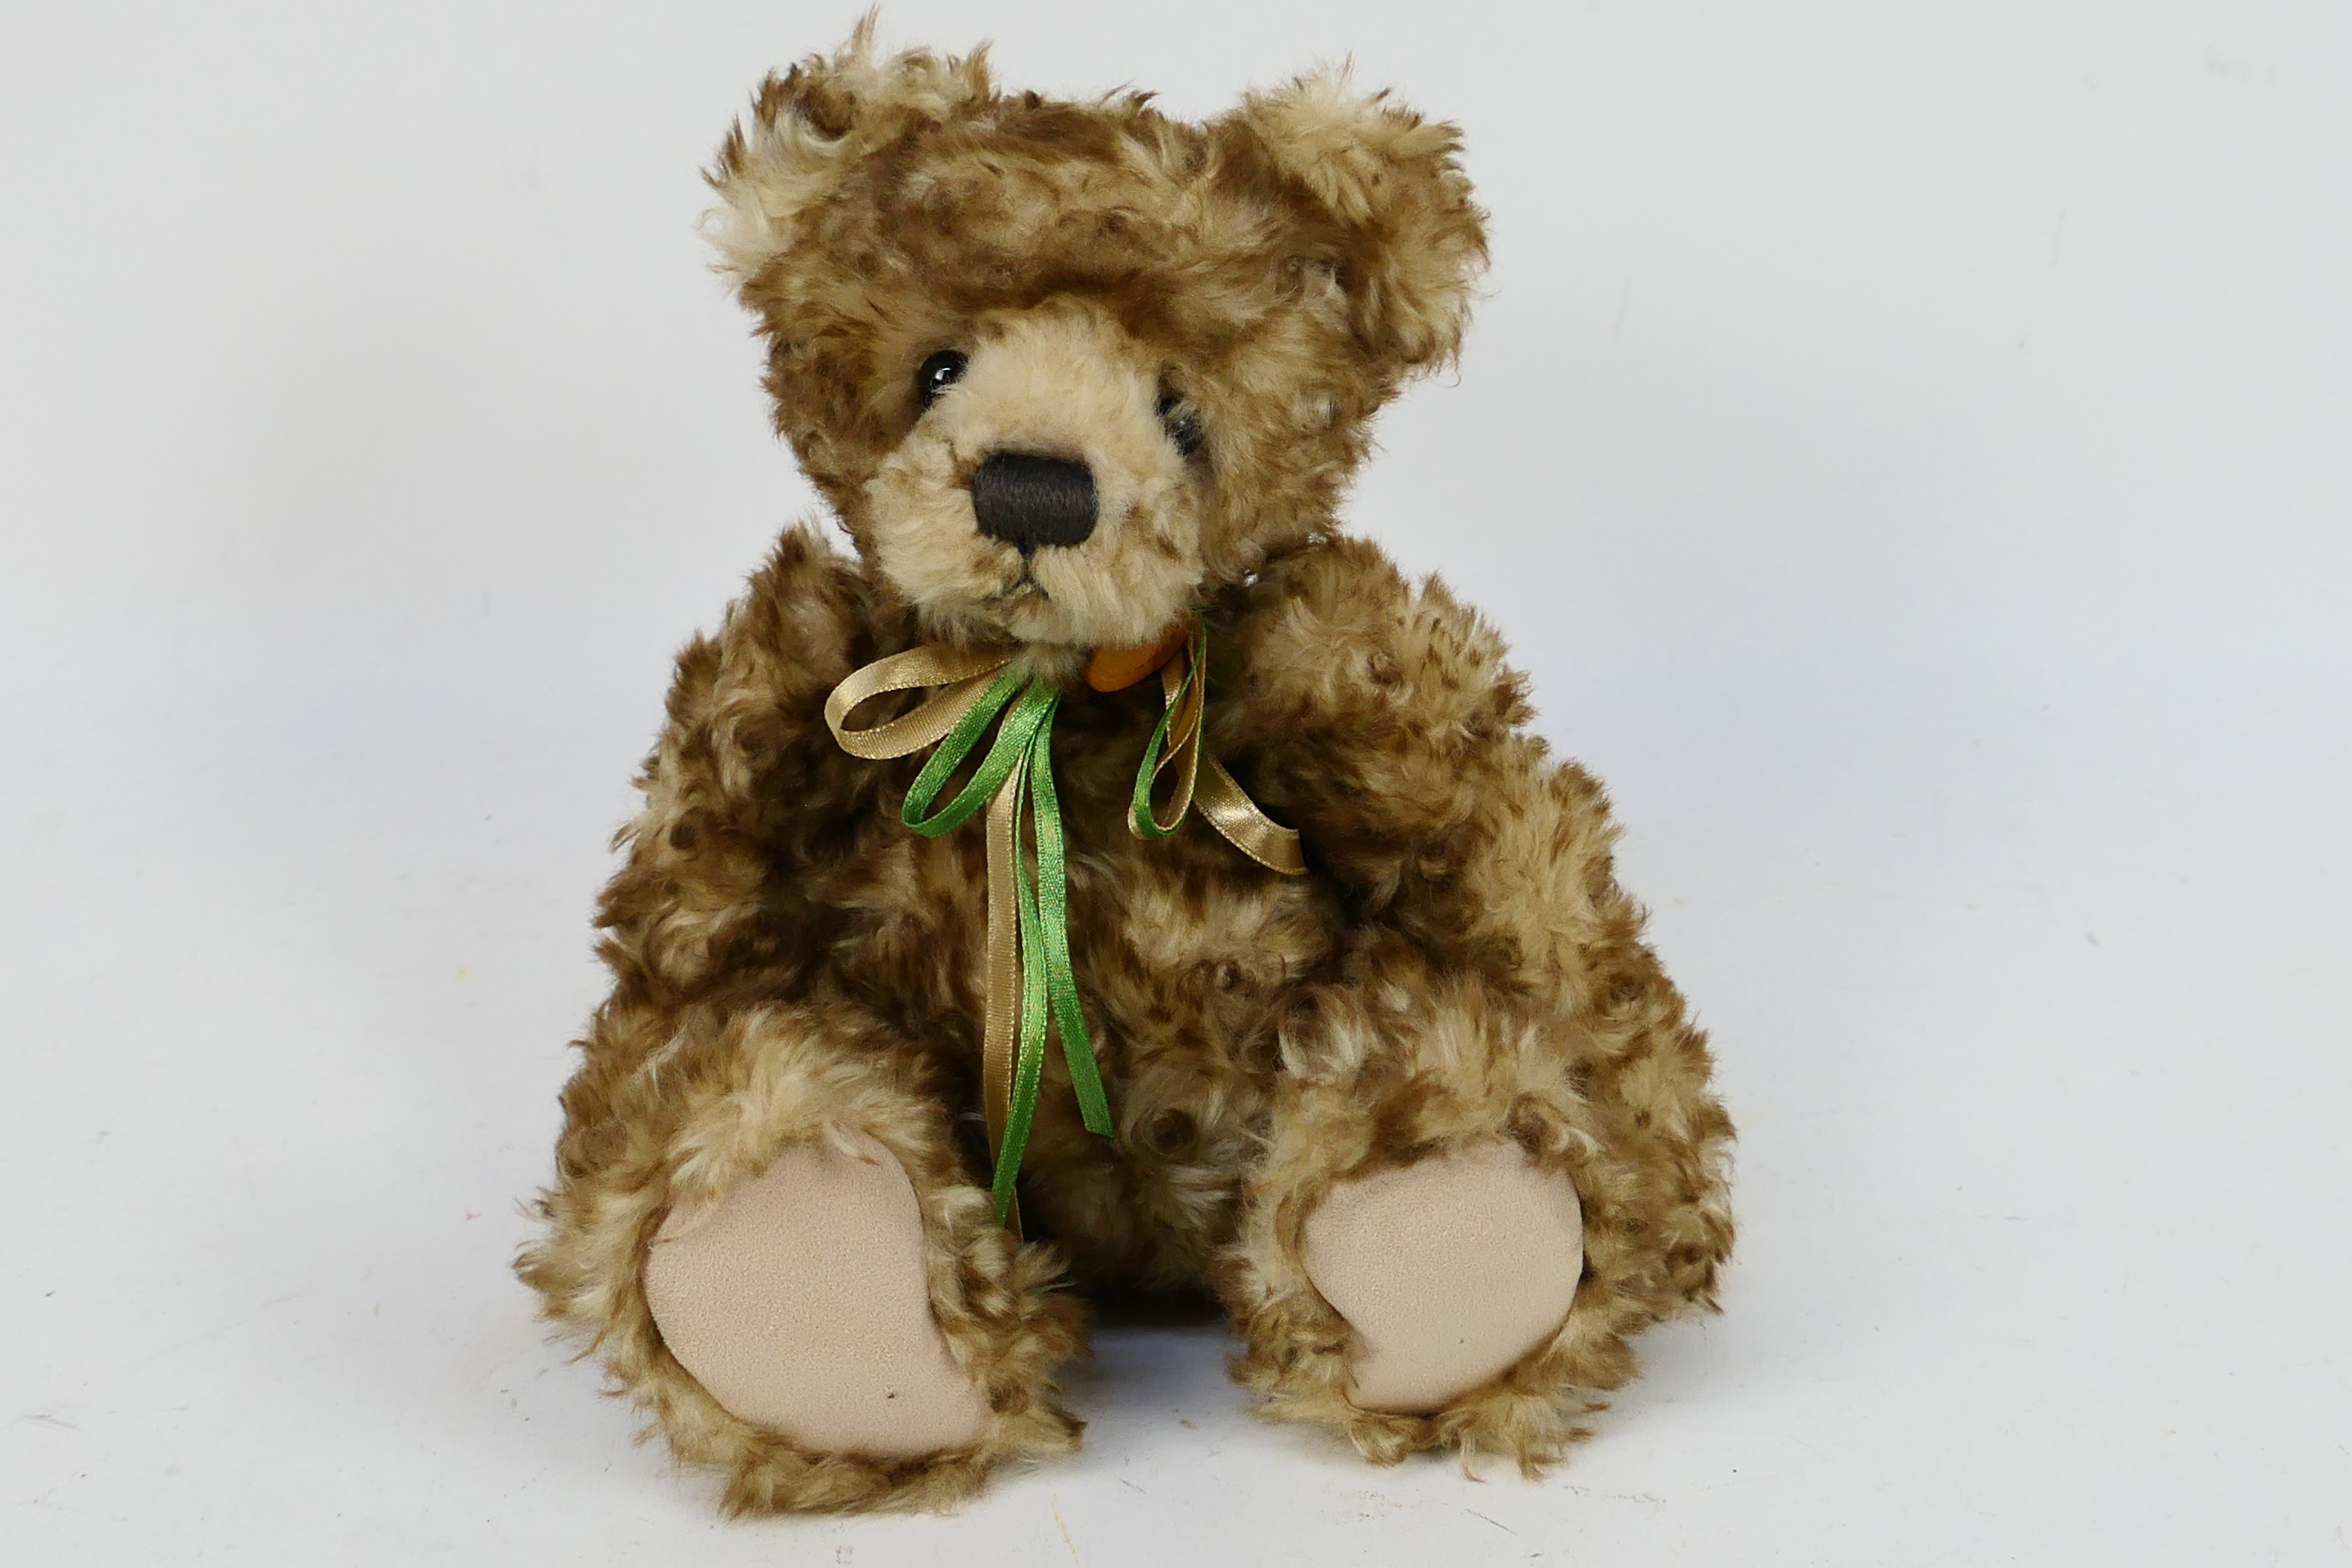 Charlie Bears - An unmarked Charlie Bears soft toy teddy bear with jointed limbs, - Image 2 of 5